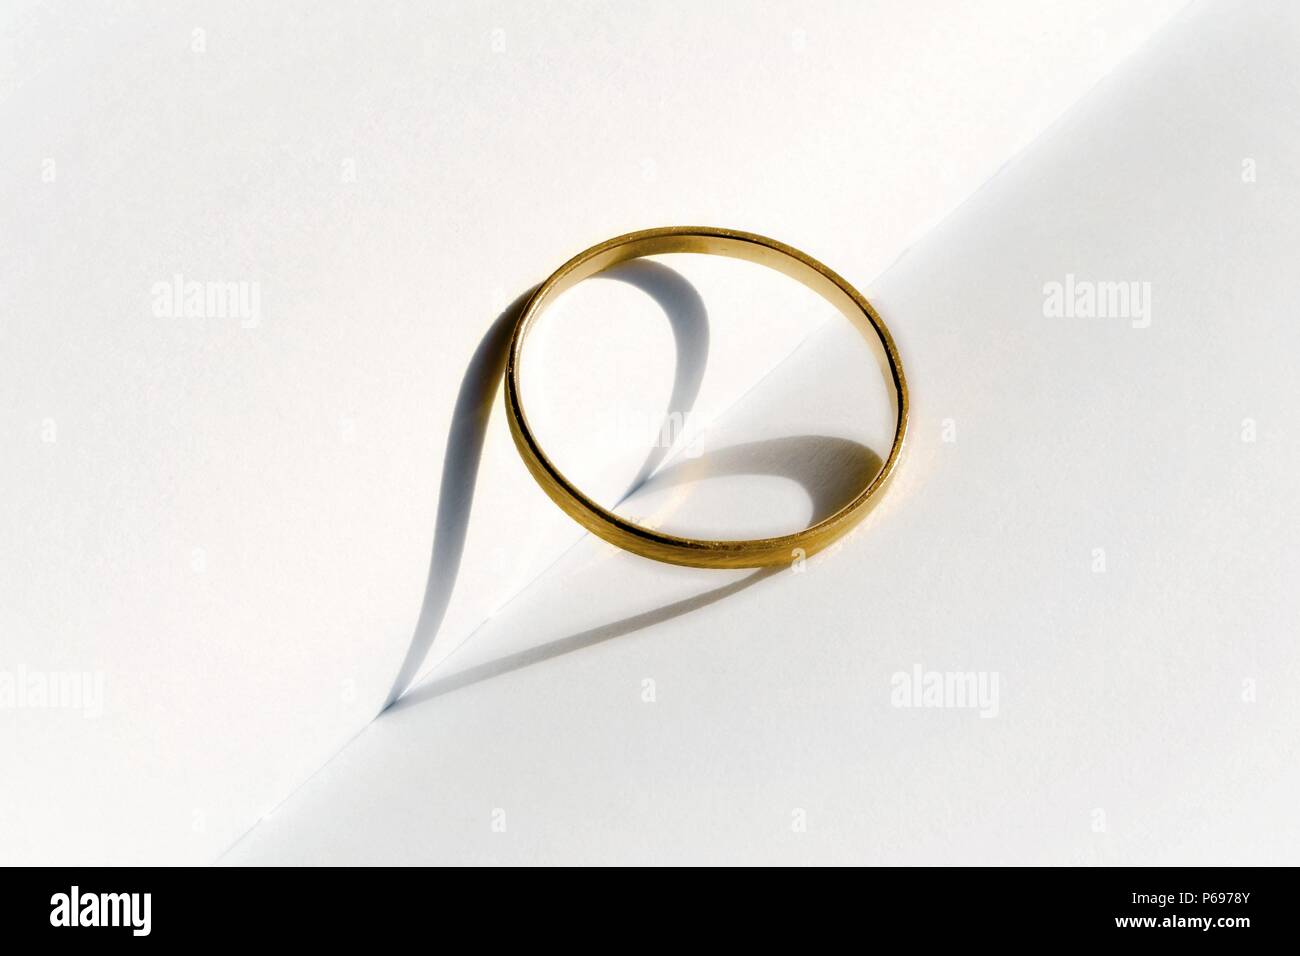 Shadow of a wedding ring Stock Photo